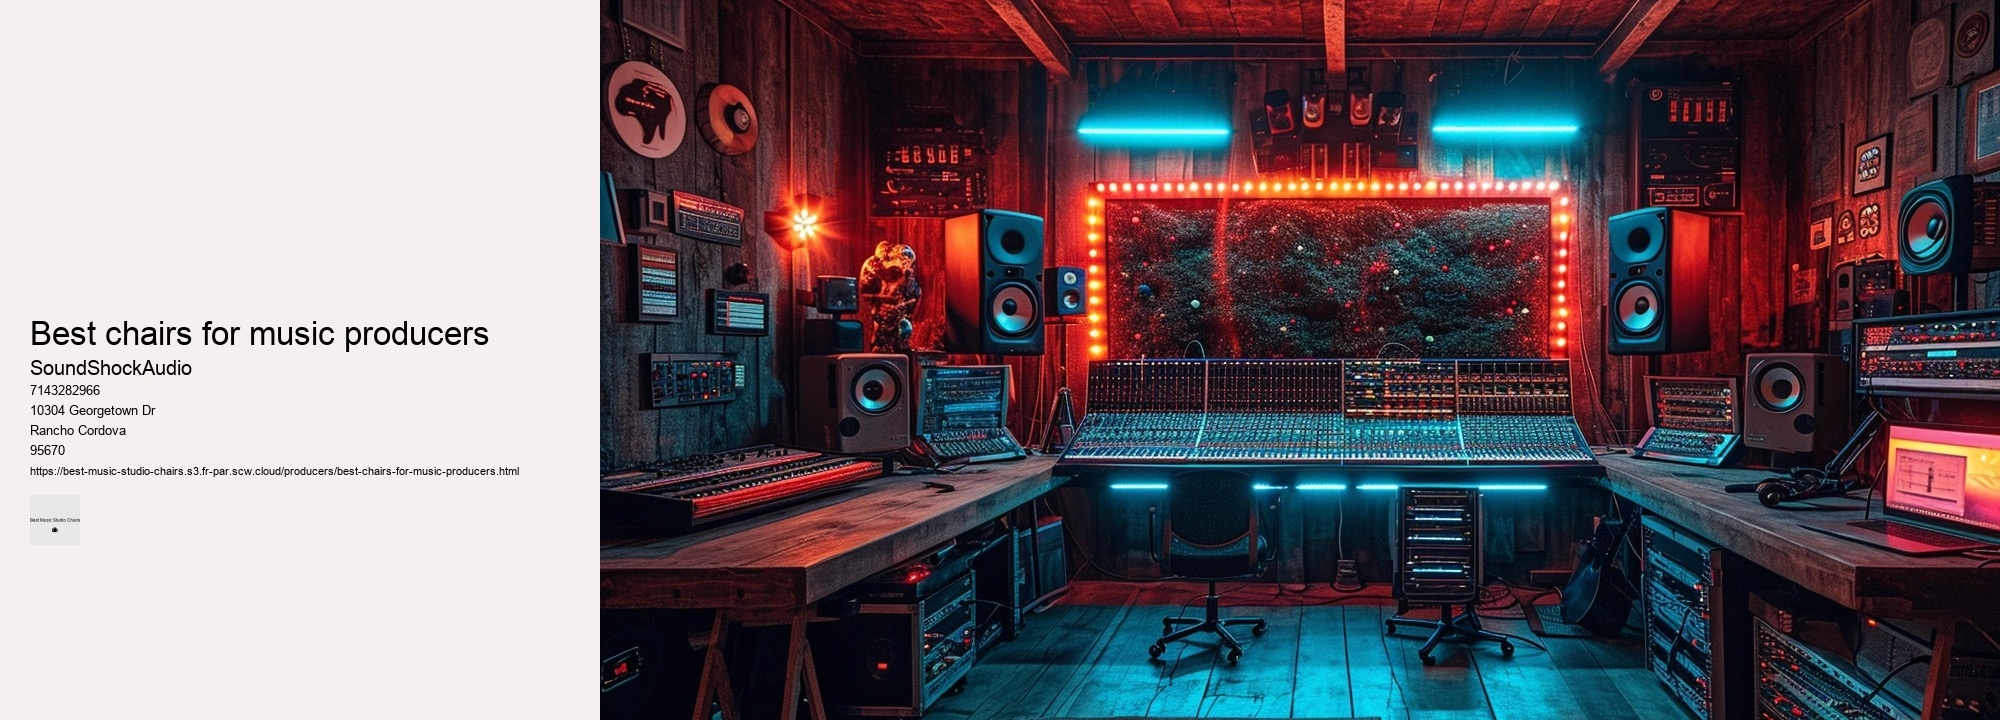 best chairs for music producers